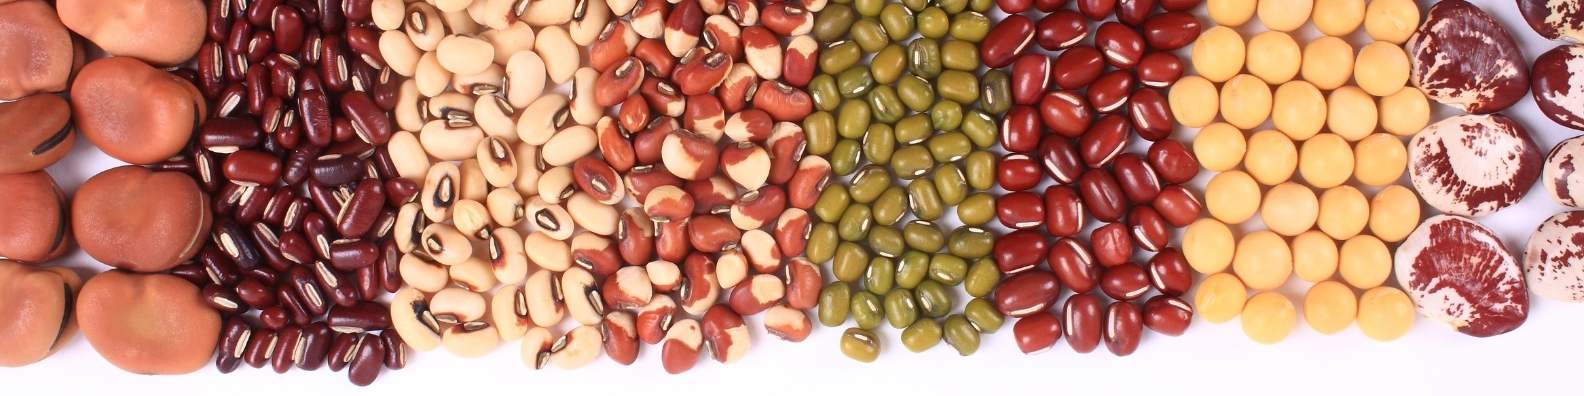 Explore Different Types of Beans